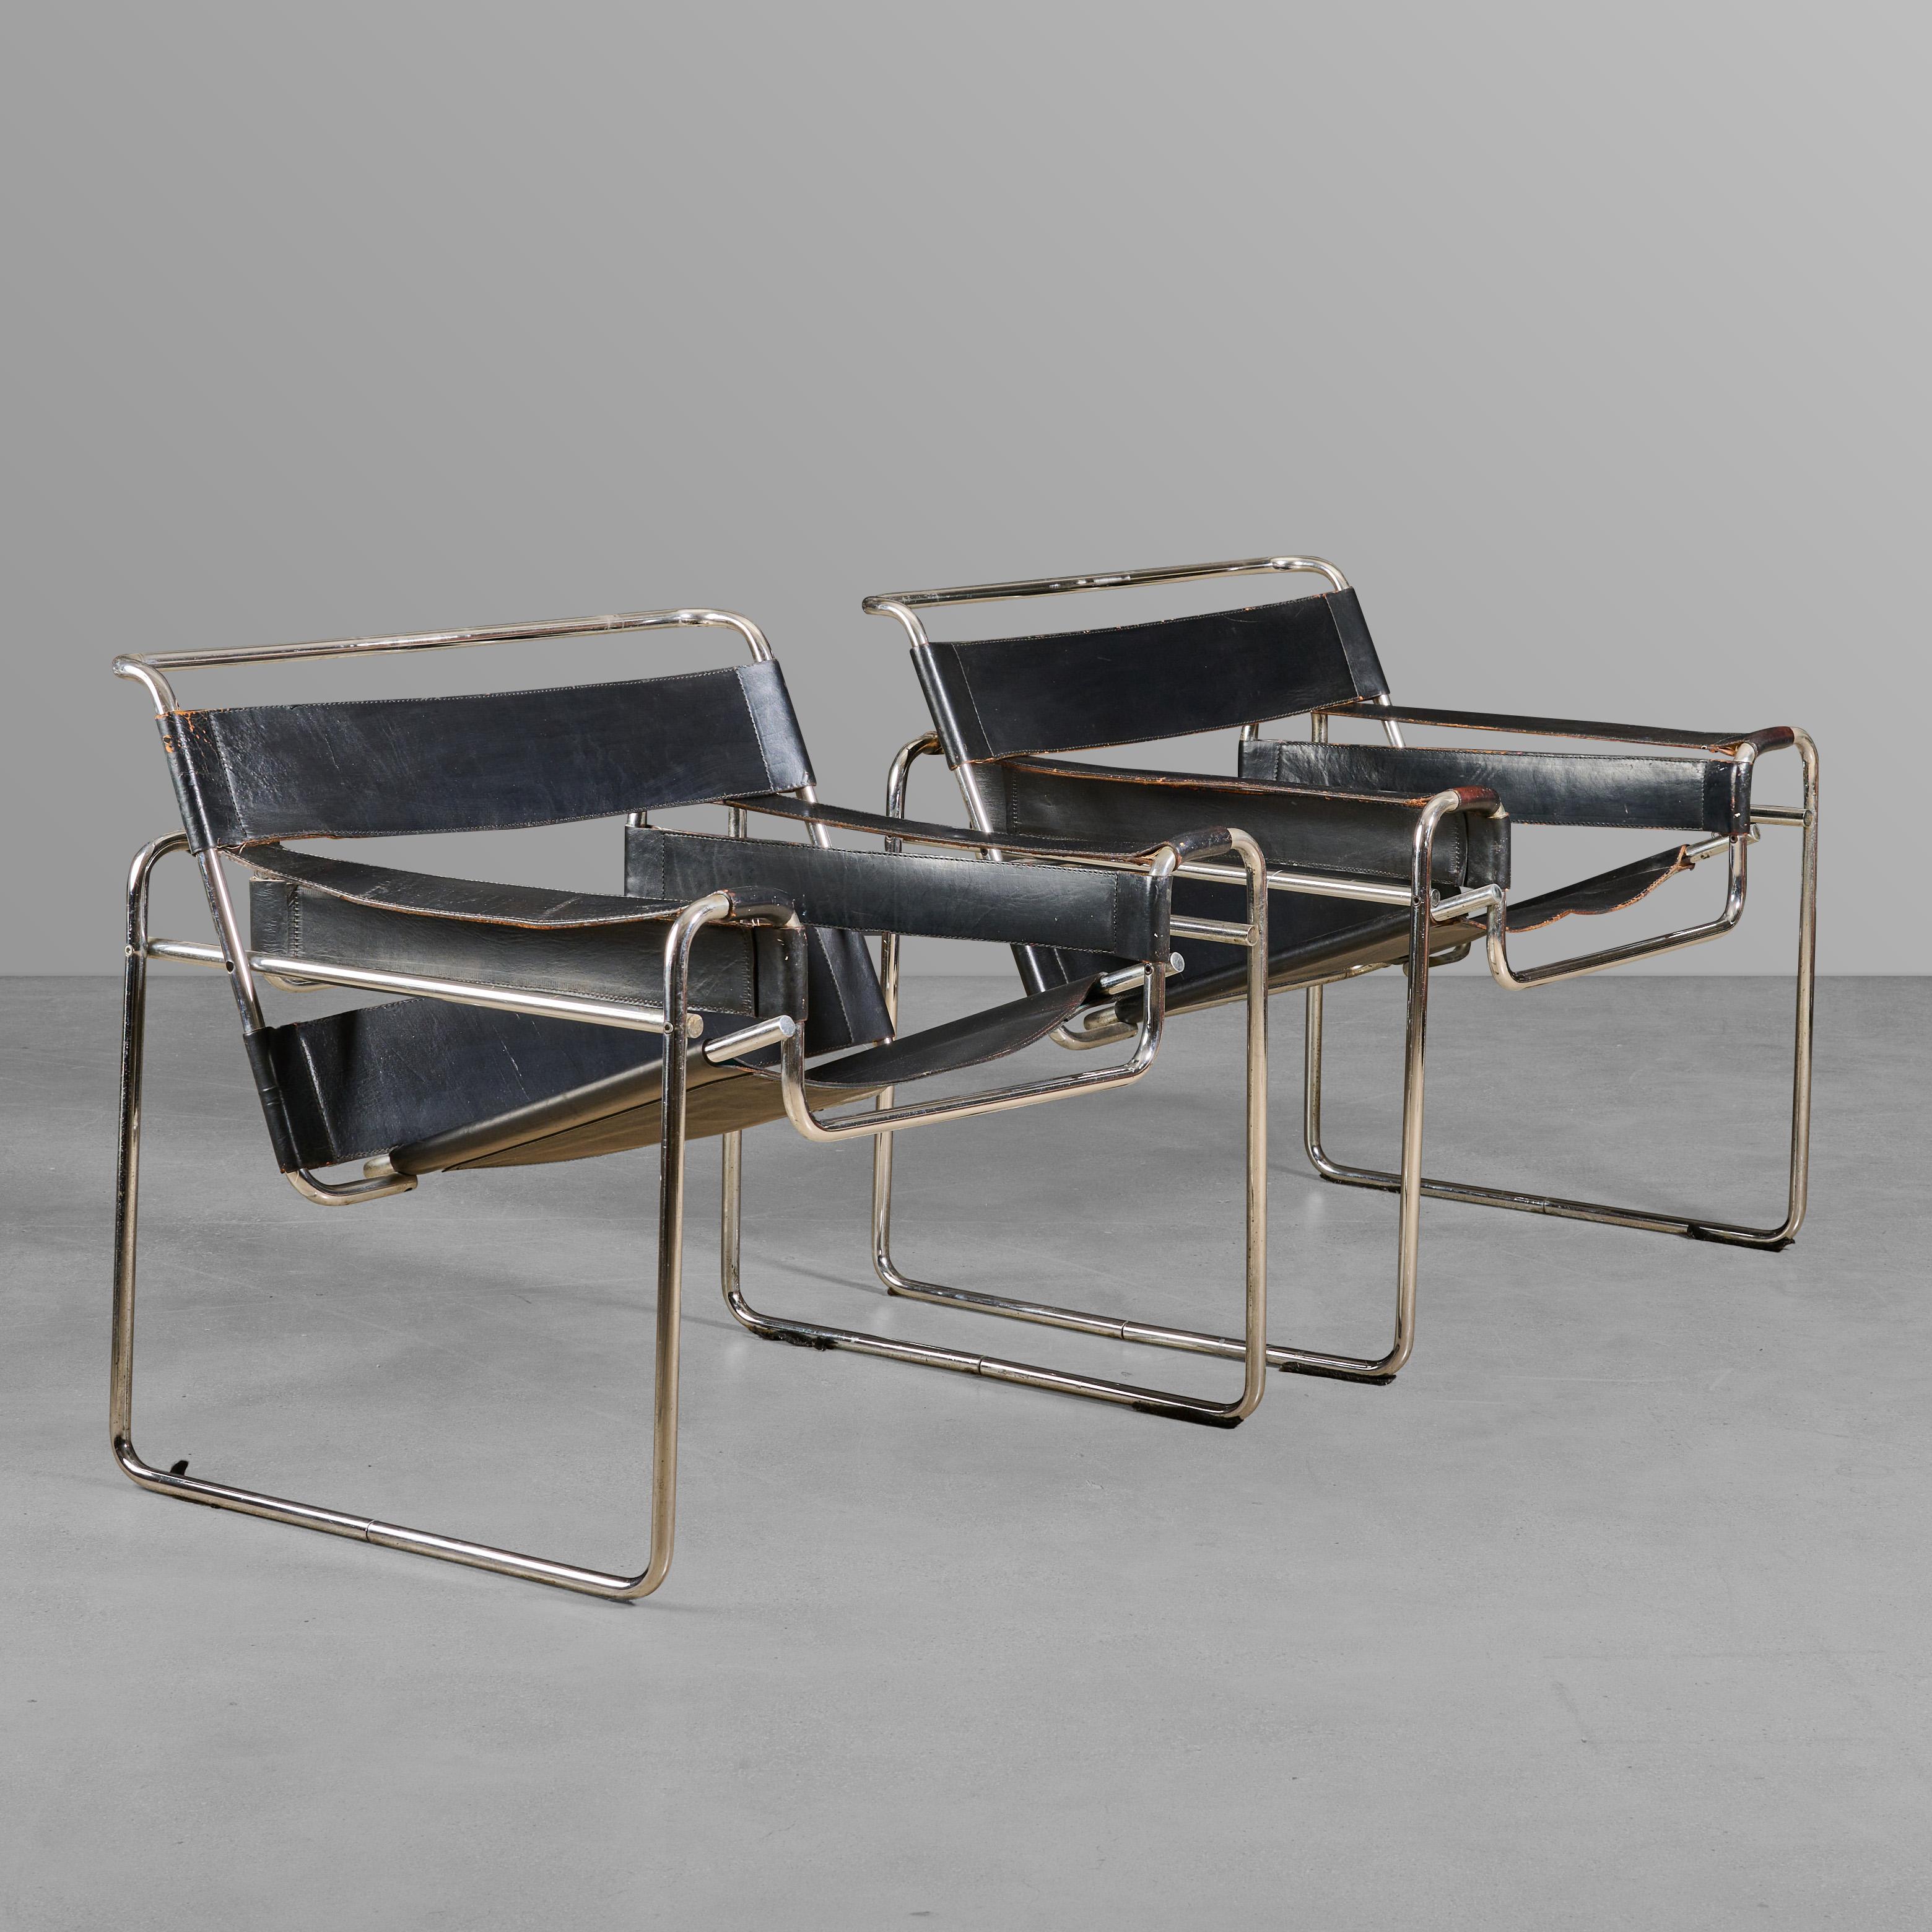 Chrome and leather pair of chairs. In the style of Marcel Breuer B3 chair.

